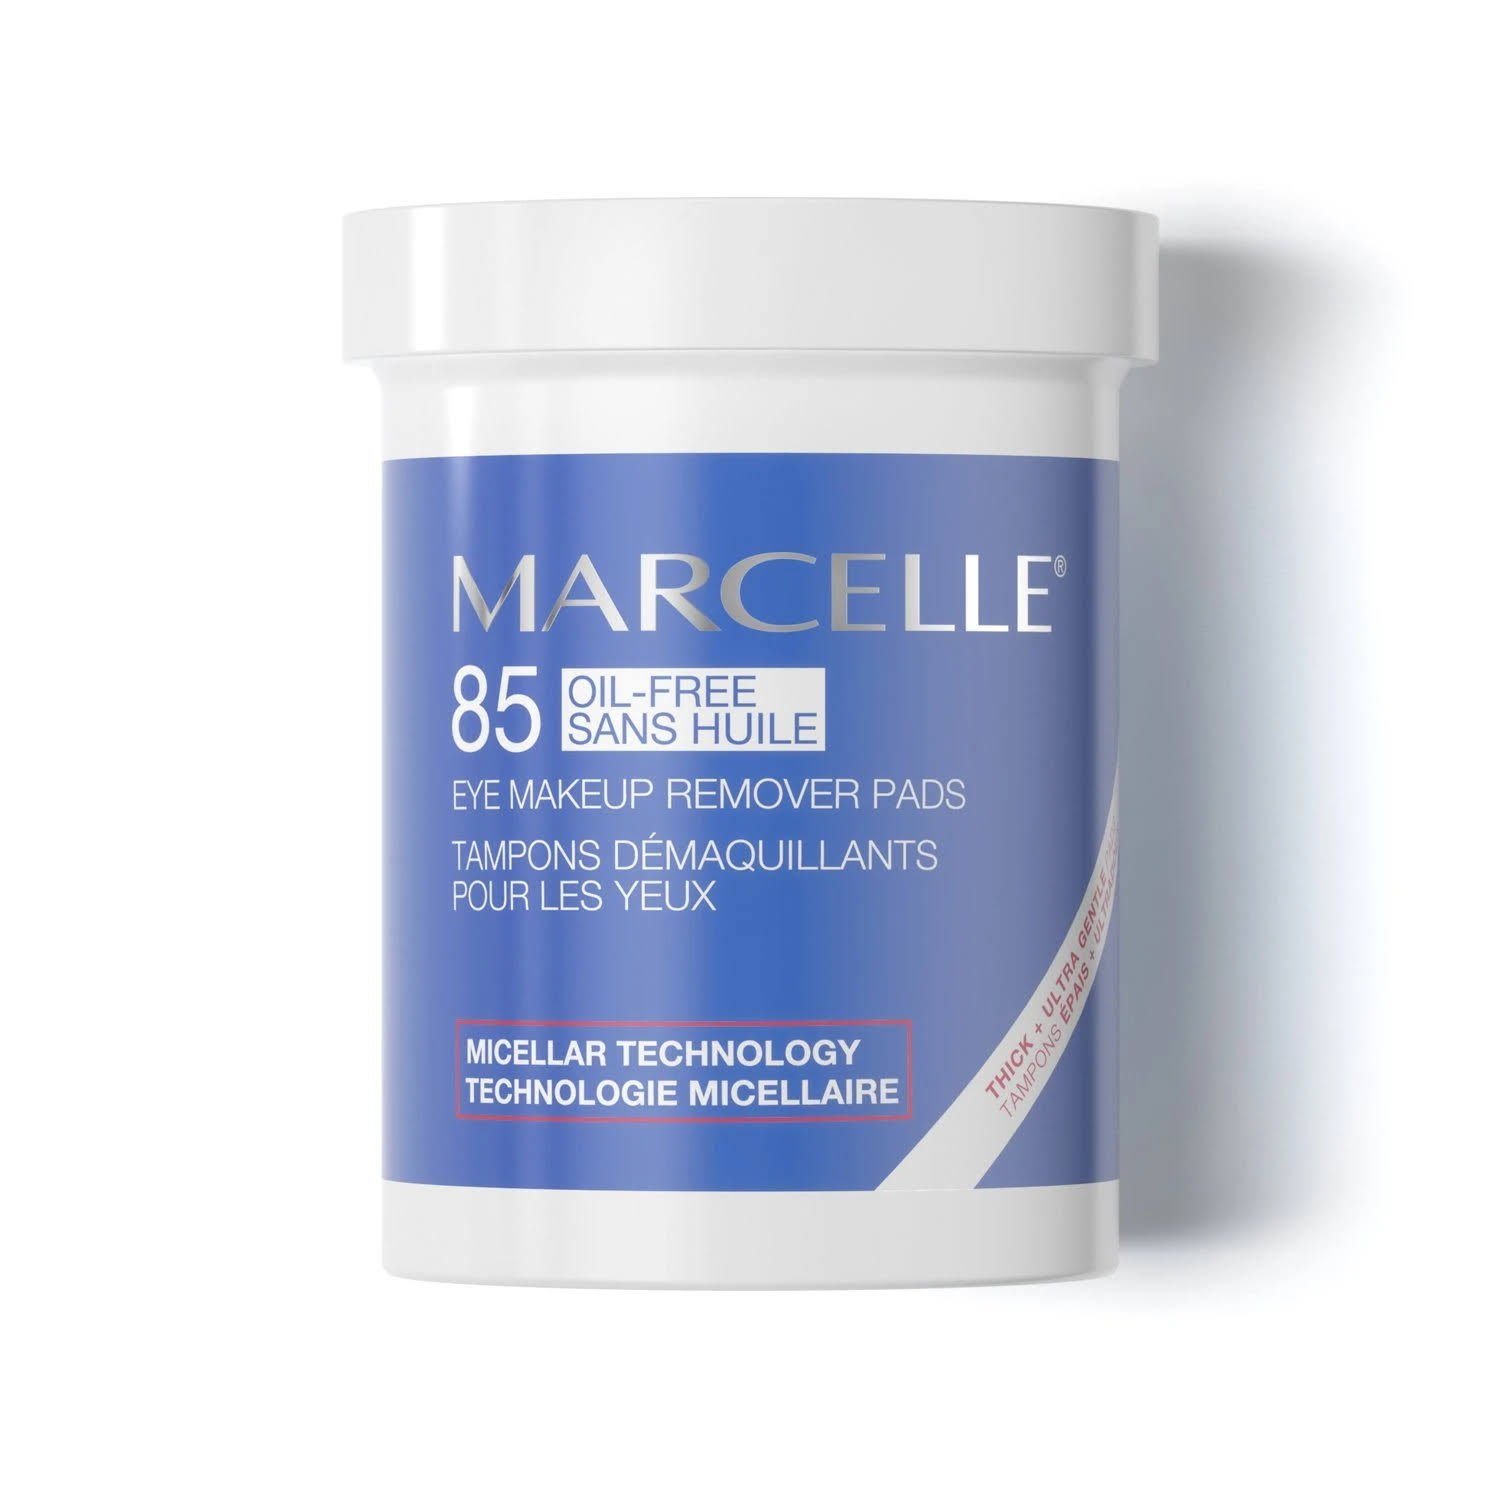 Marcelle Oil-Free Eye Makeup Remover Pads - 85 Pads